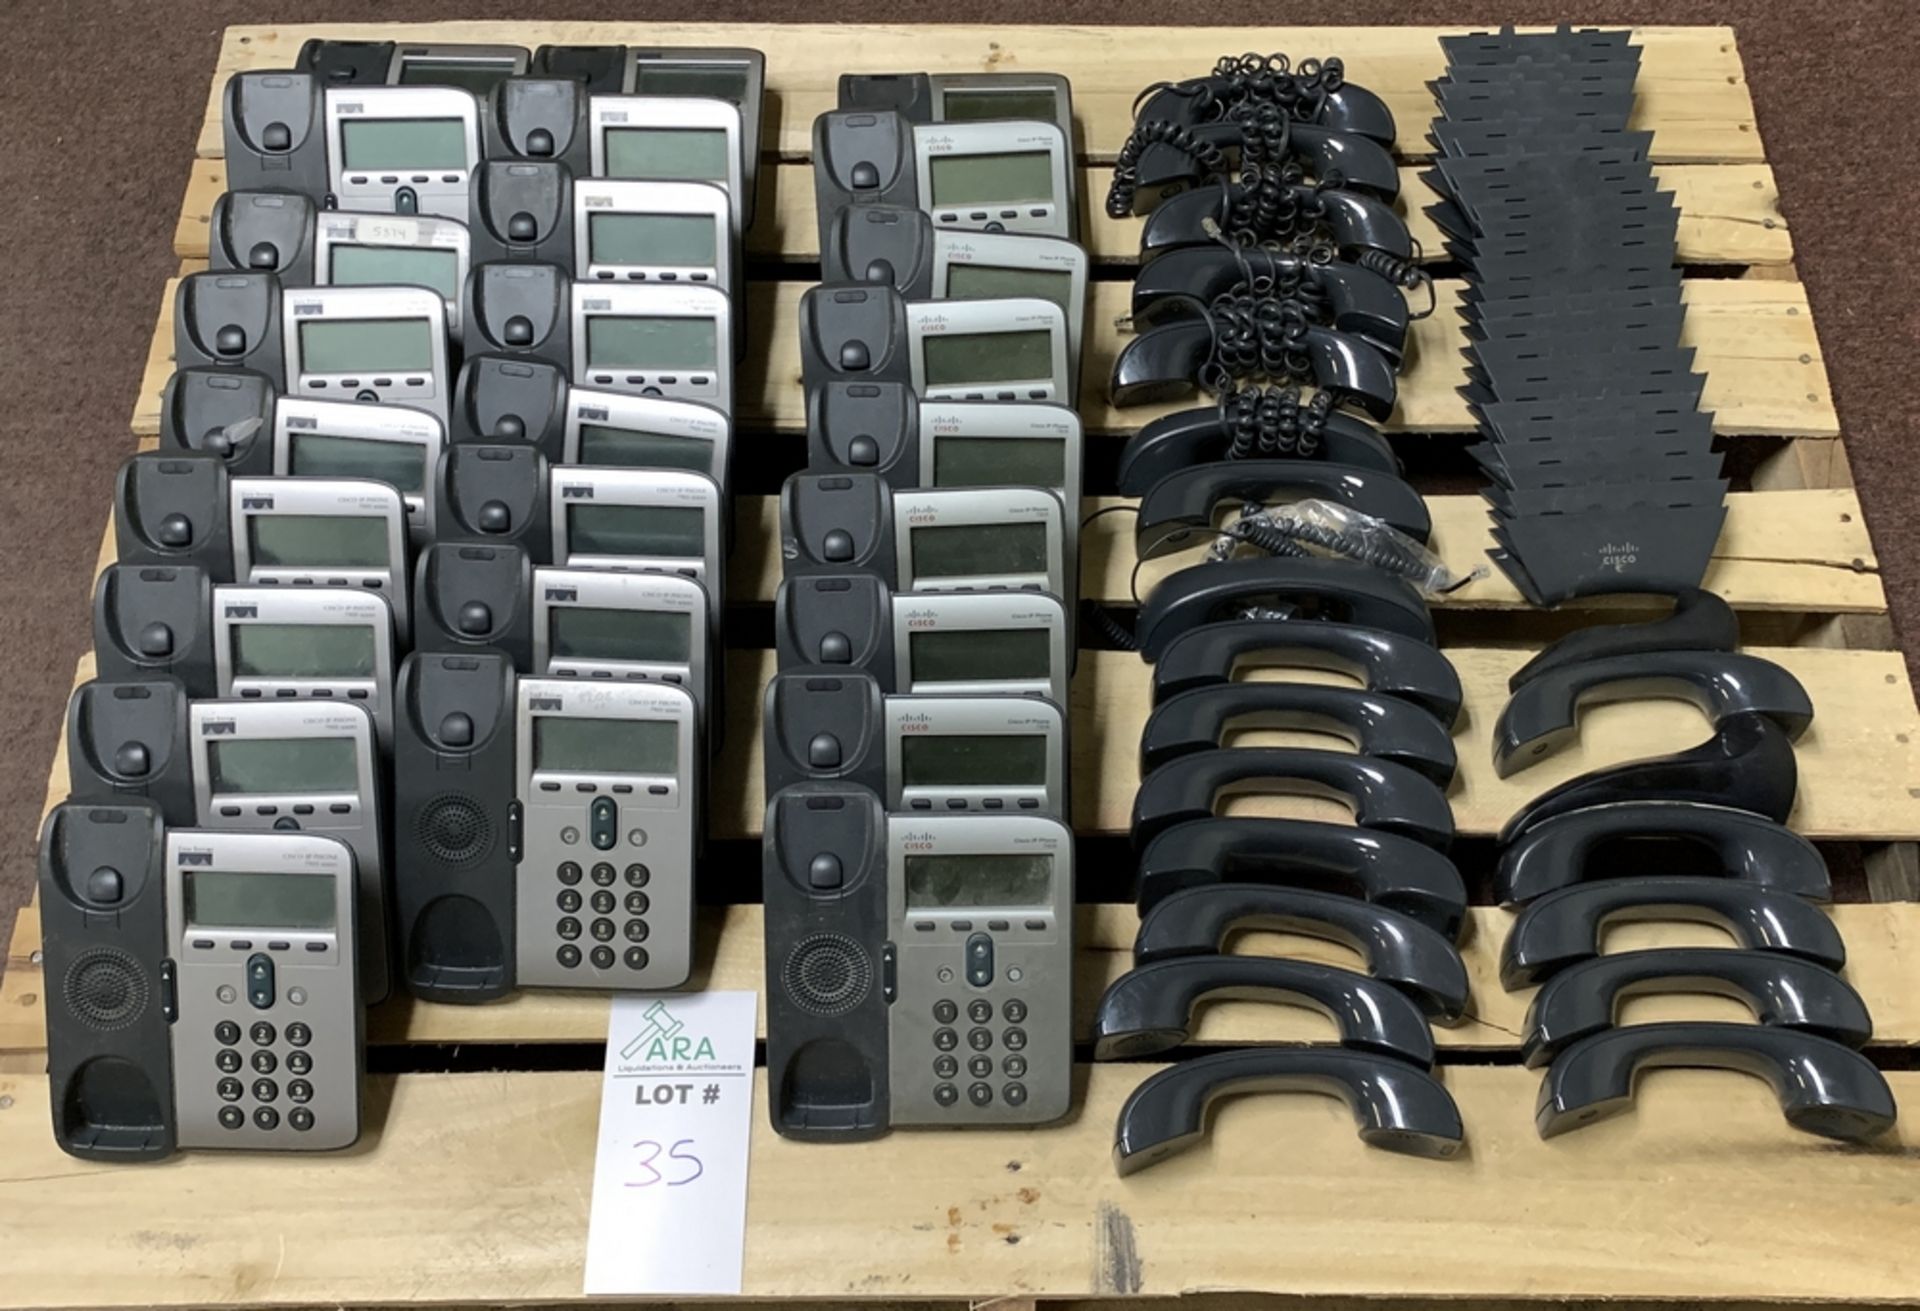 26 CISCO PHONE SYSTEMS - 17 MODEL 7905 & 9 MODEL 7906 - MOST INCLUDE HANDSETS ALL ITEMS ARE SOLD - Bild 2 aus 5